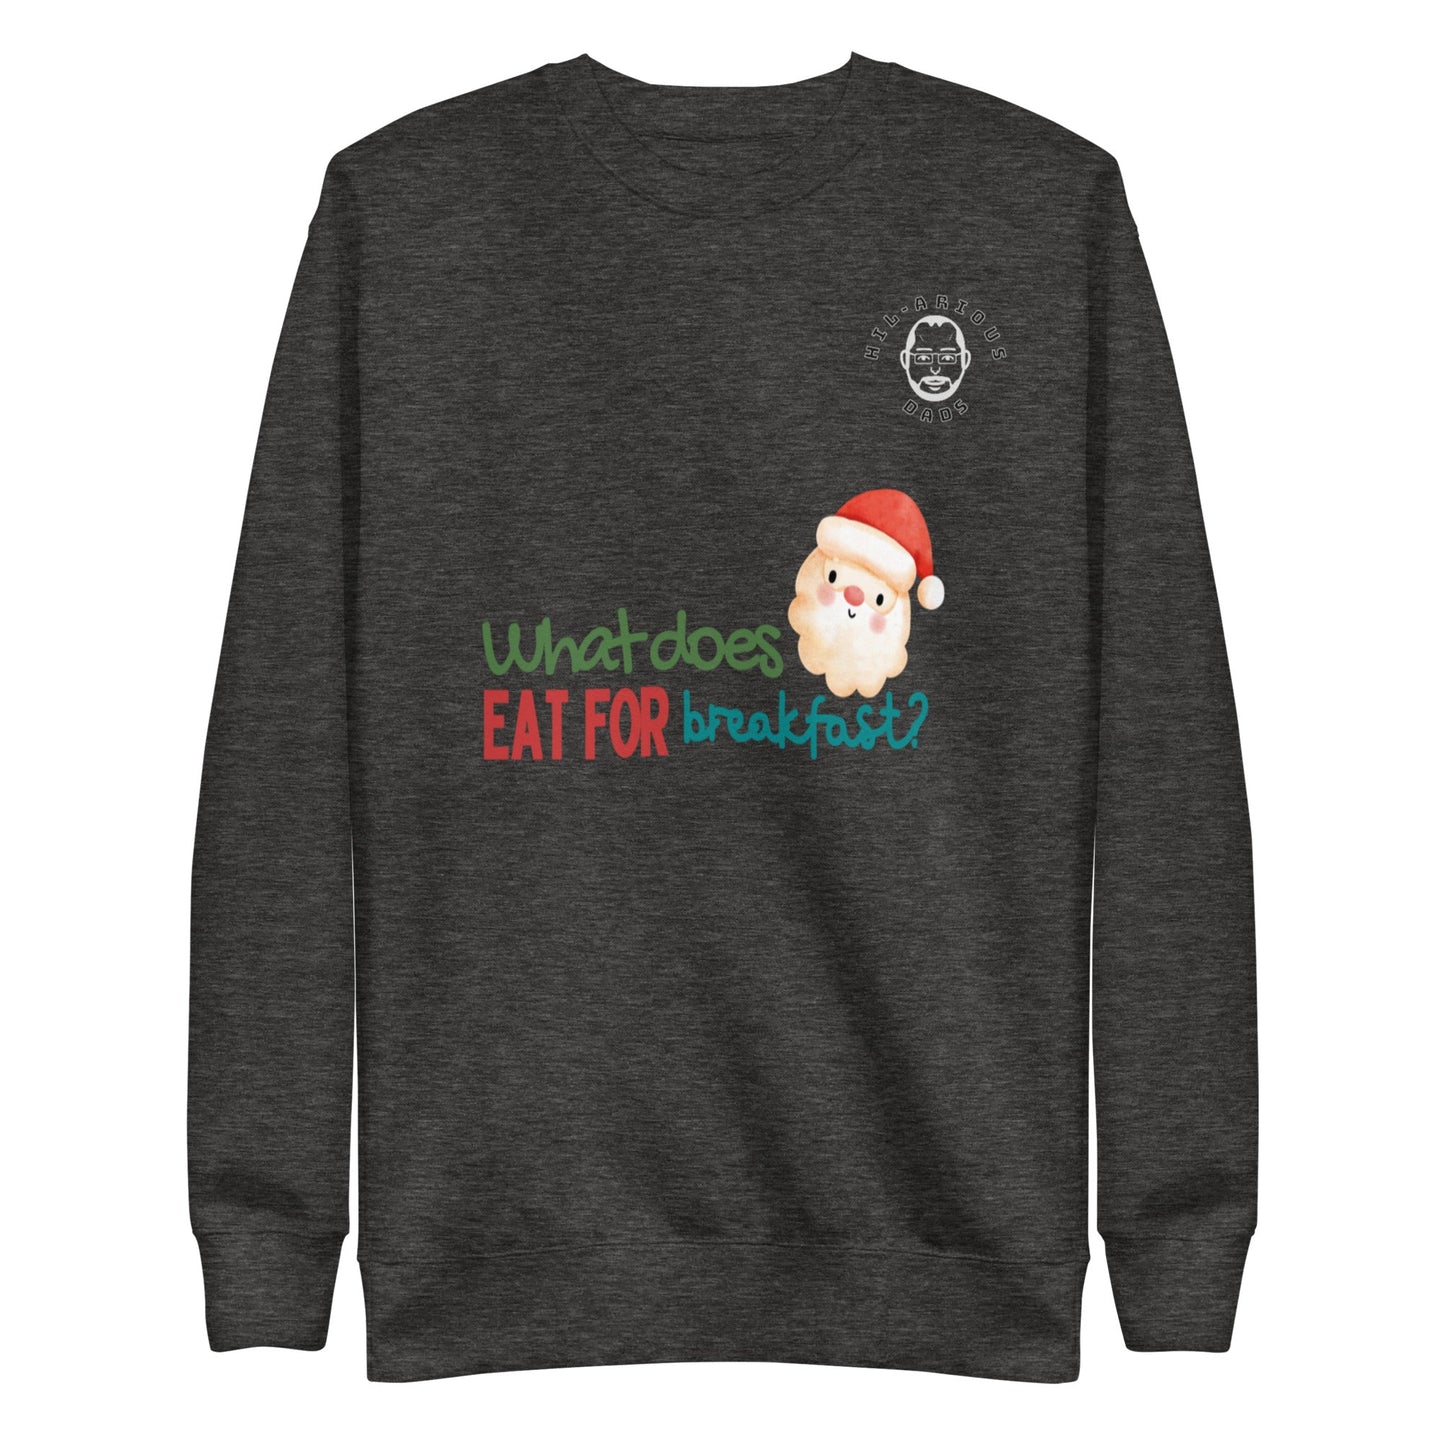 What does Santa eat for breakfast?-Sweatshirt - Hil-arious Dads